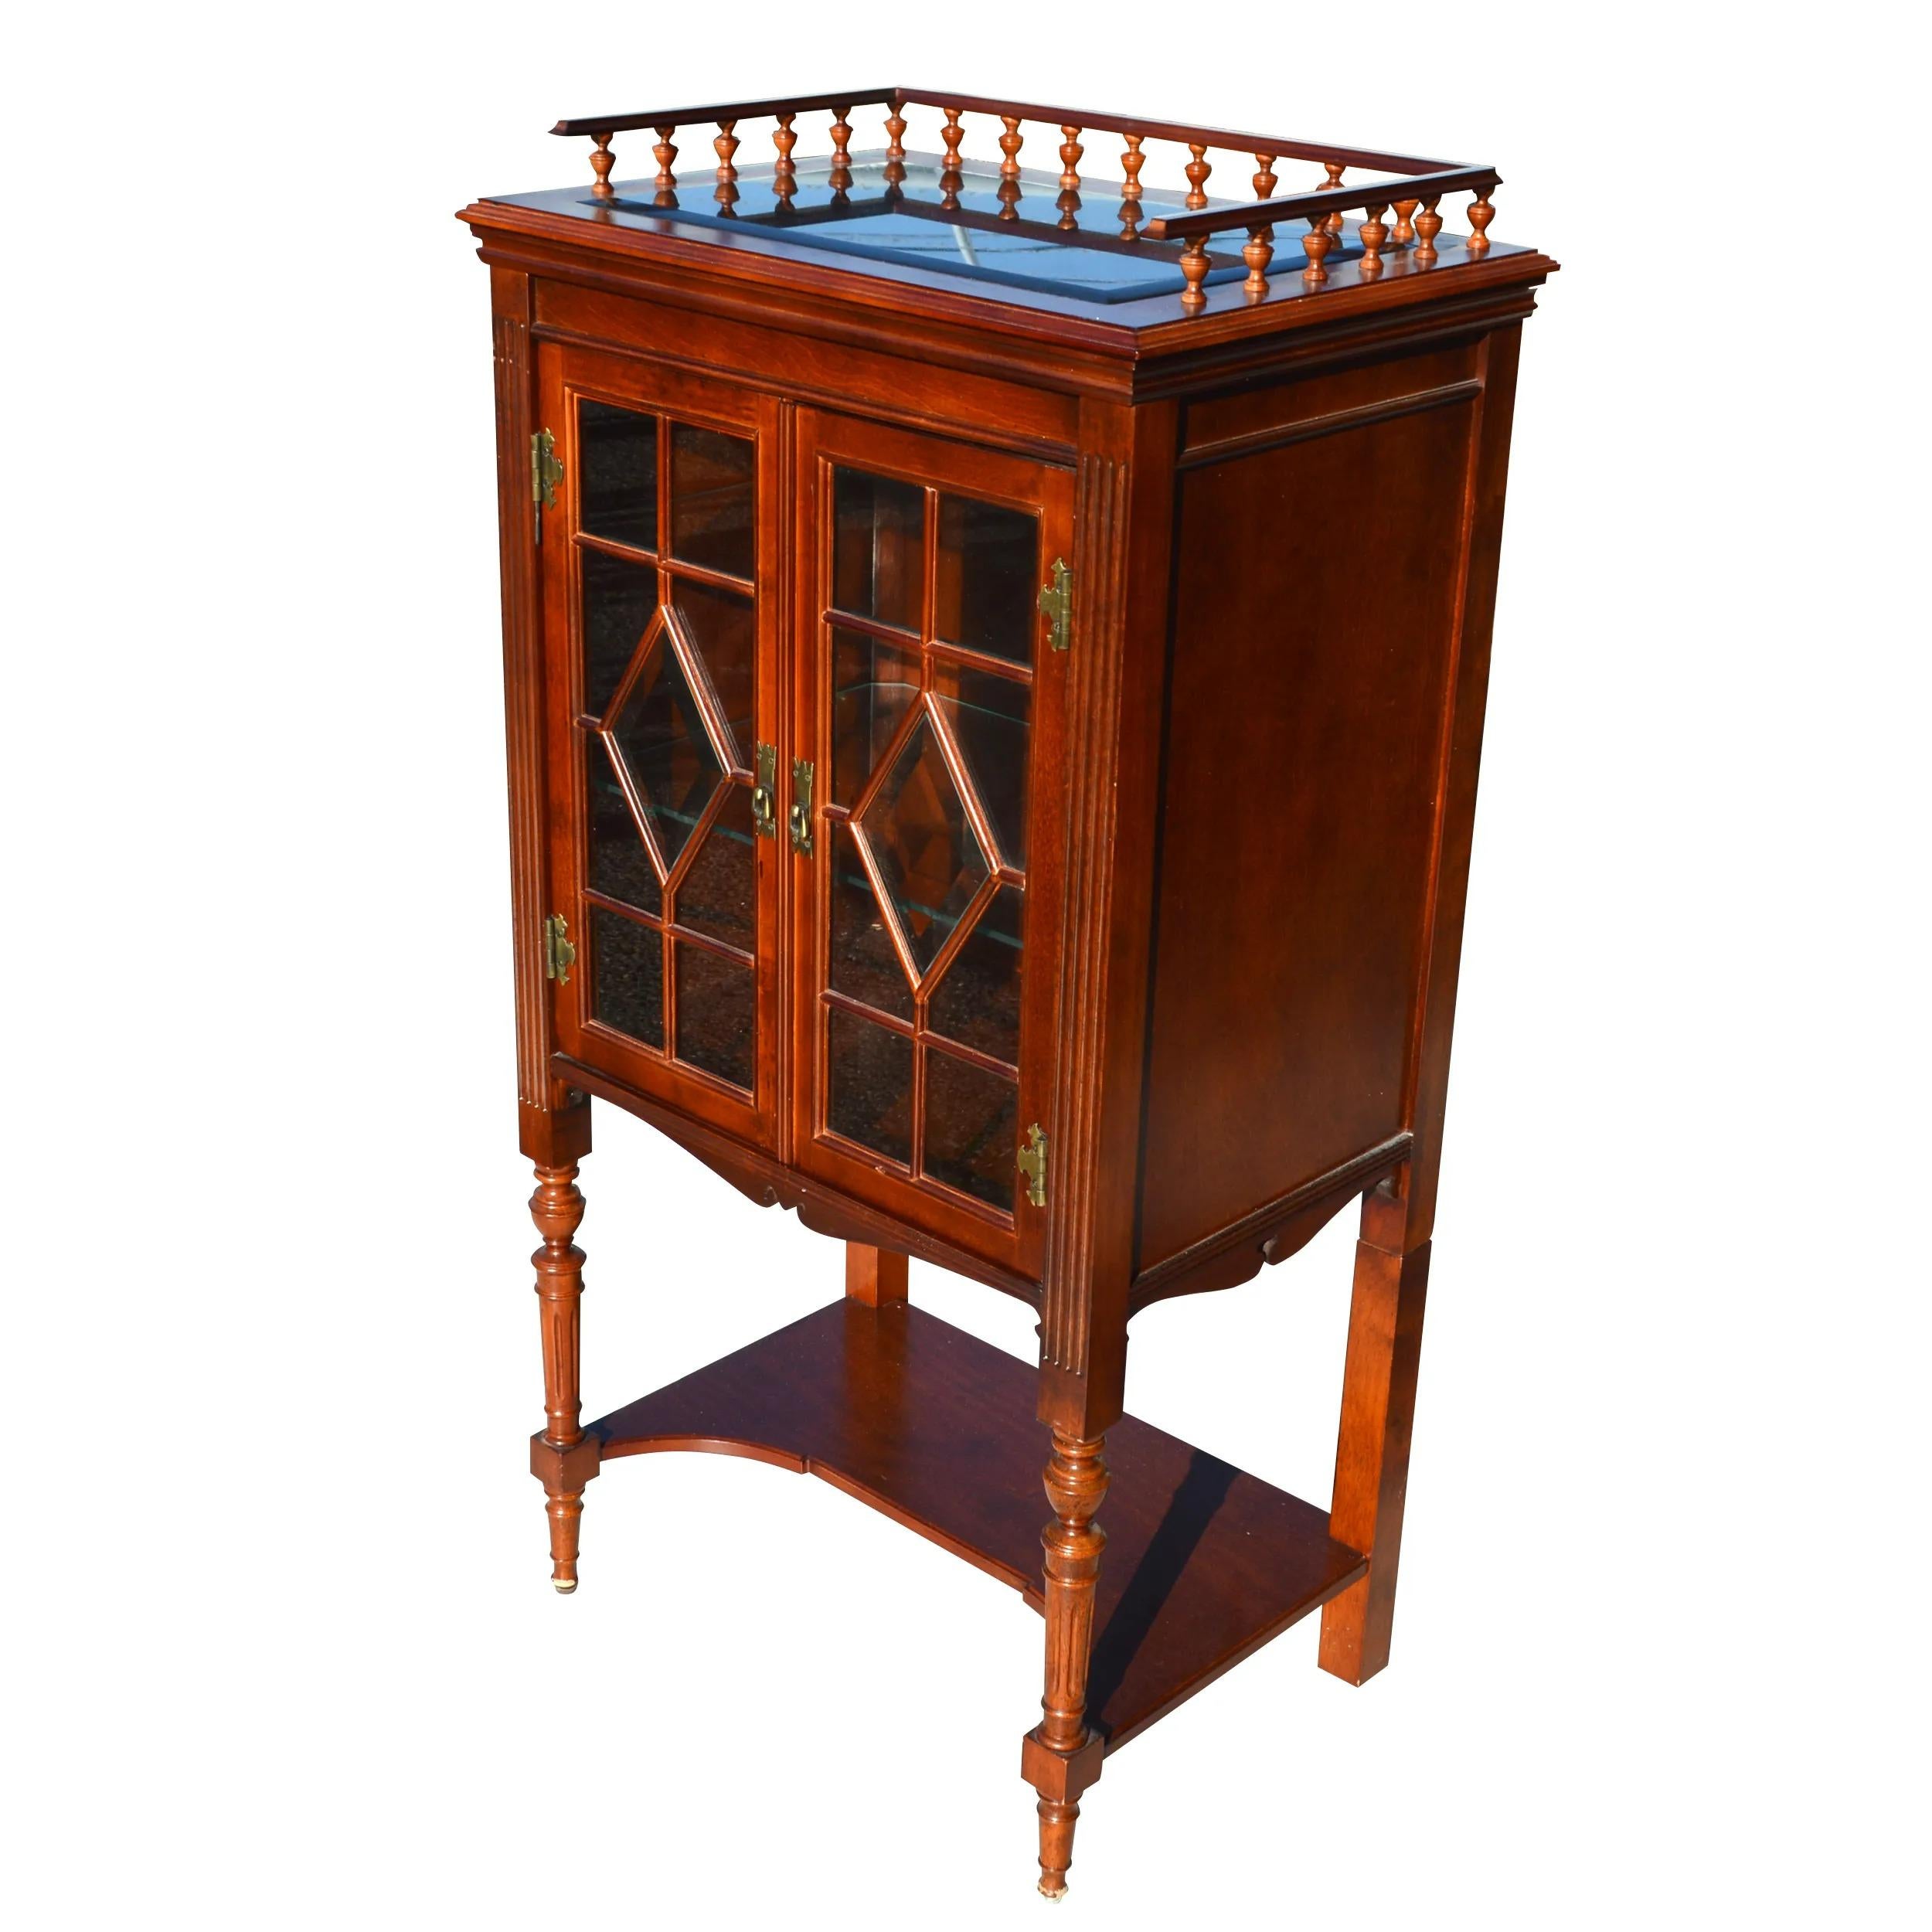 Vintage Regency Style bar cabinet 

Regency style display cabinet or bookcase

Glass fronted with fretwork and glass gallery edged top. Brass hinges and pulls.
Perfect for displaying books and other decorative pieces. Wired for interior